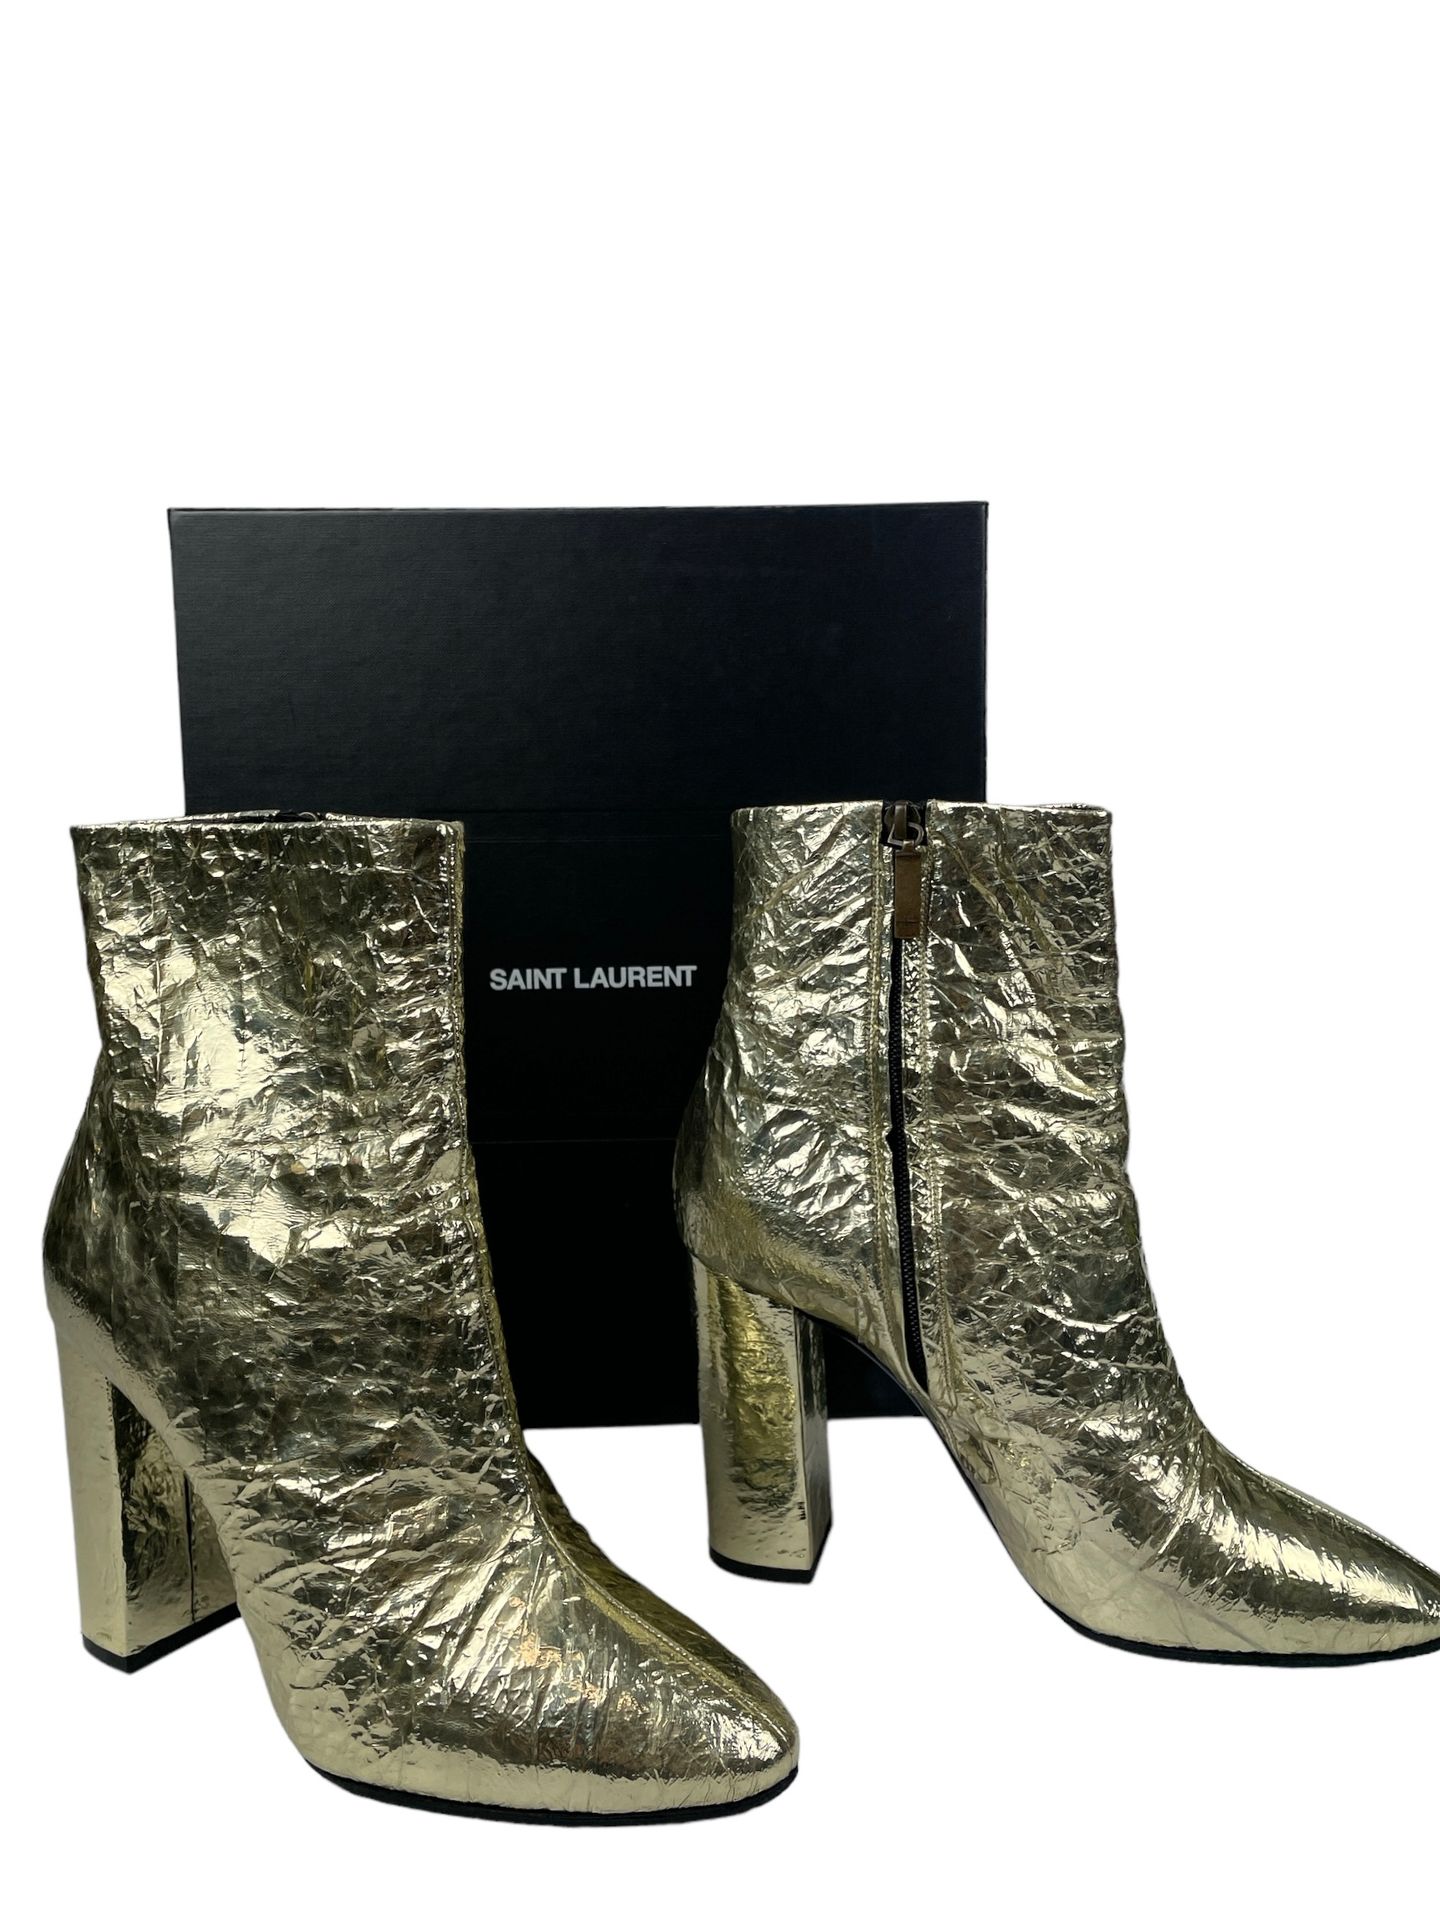 Null YVES SAINT LAURENT
Pair of crumpled gold leather ankle boots with 11 cm hee&hellip;